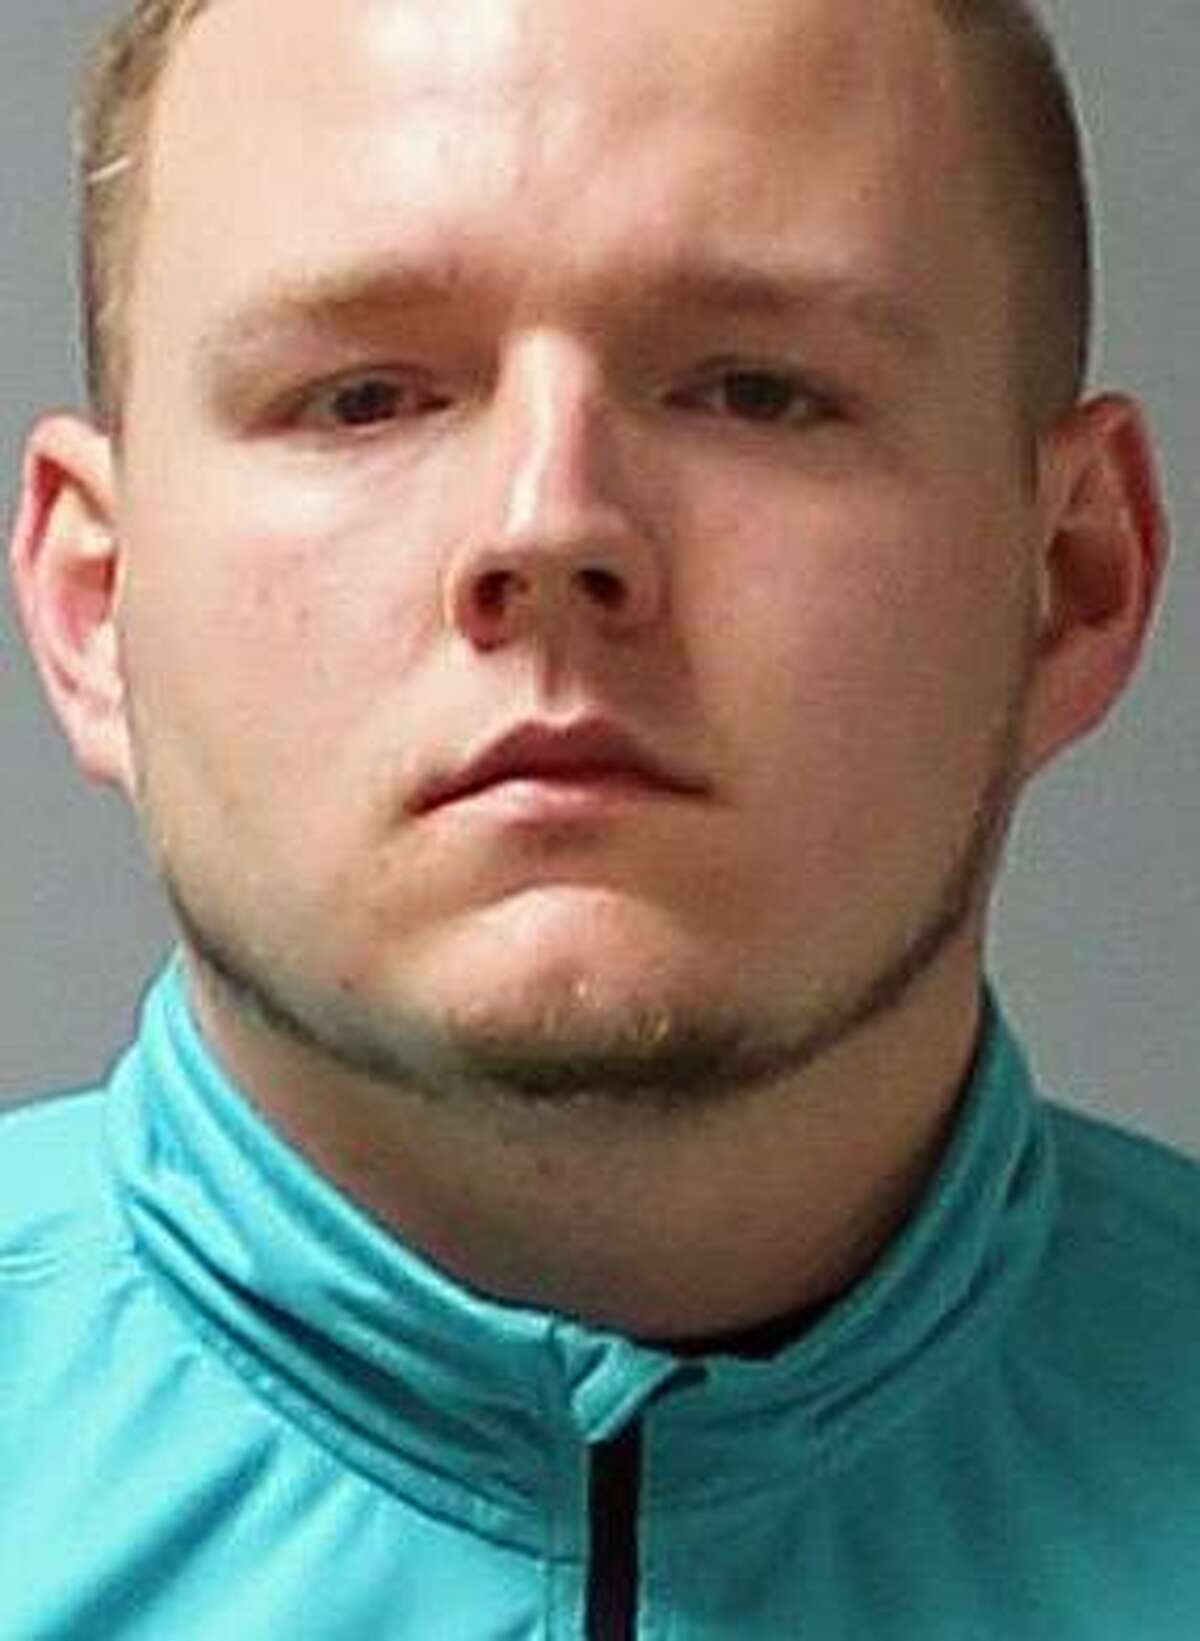 Joshua Rita, 25, of Meriden, was arrested on Wednesday, Dec. 14, 2016 in connecting with a motor-vehicle accident on I-91 in July. State Police say Rita was DUI when his vehilce slammed into into the rear of a state trooper’s cruiser. Rita and the trooper had minor injuries.